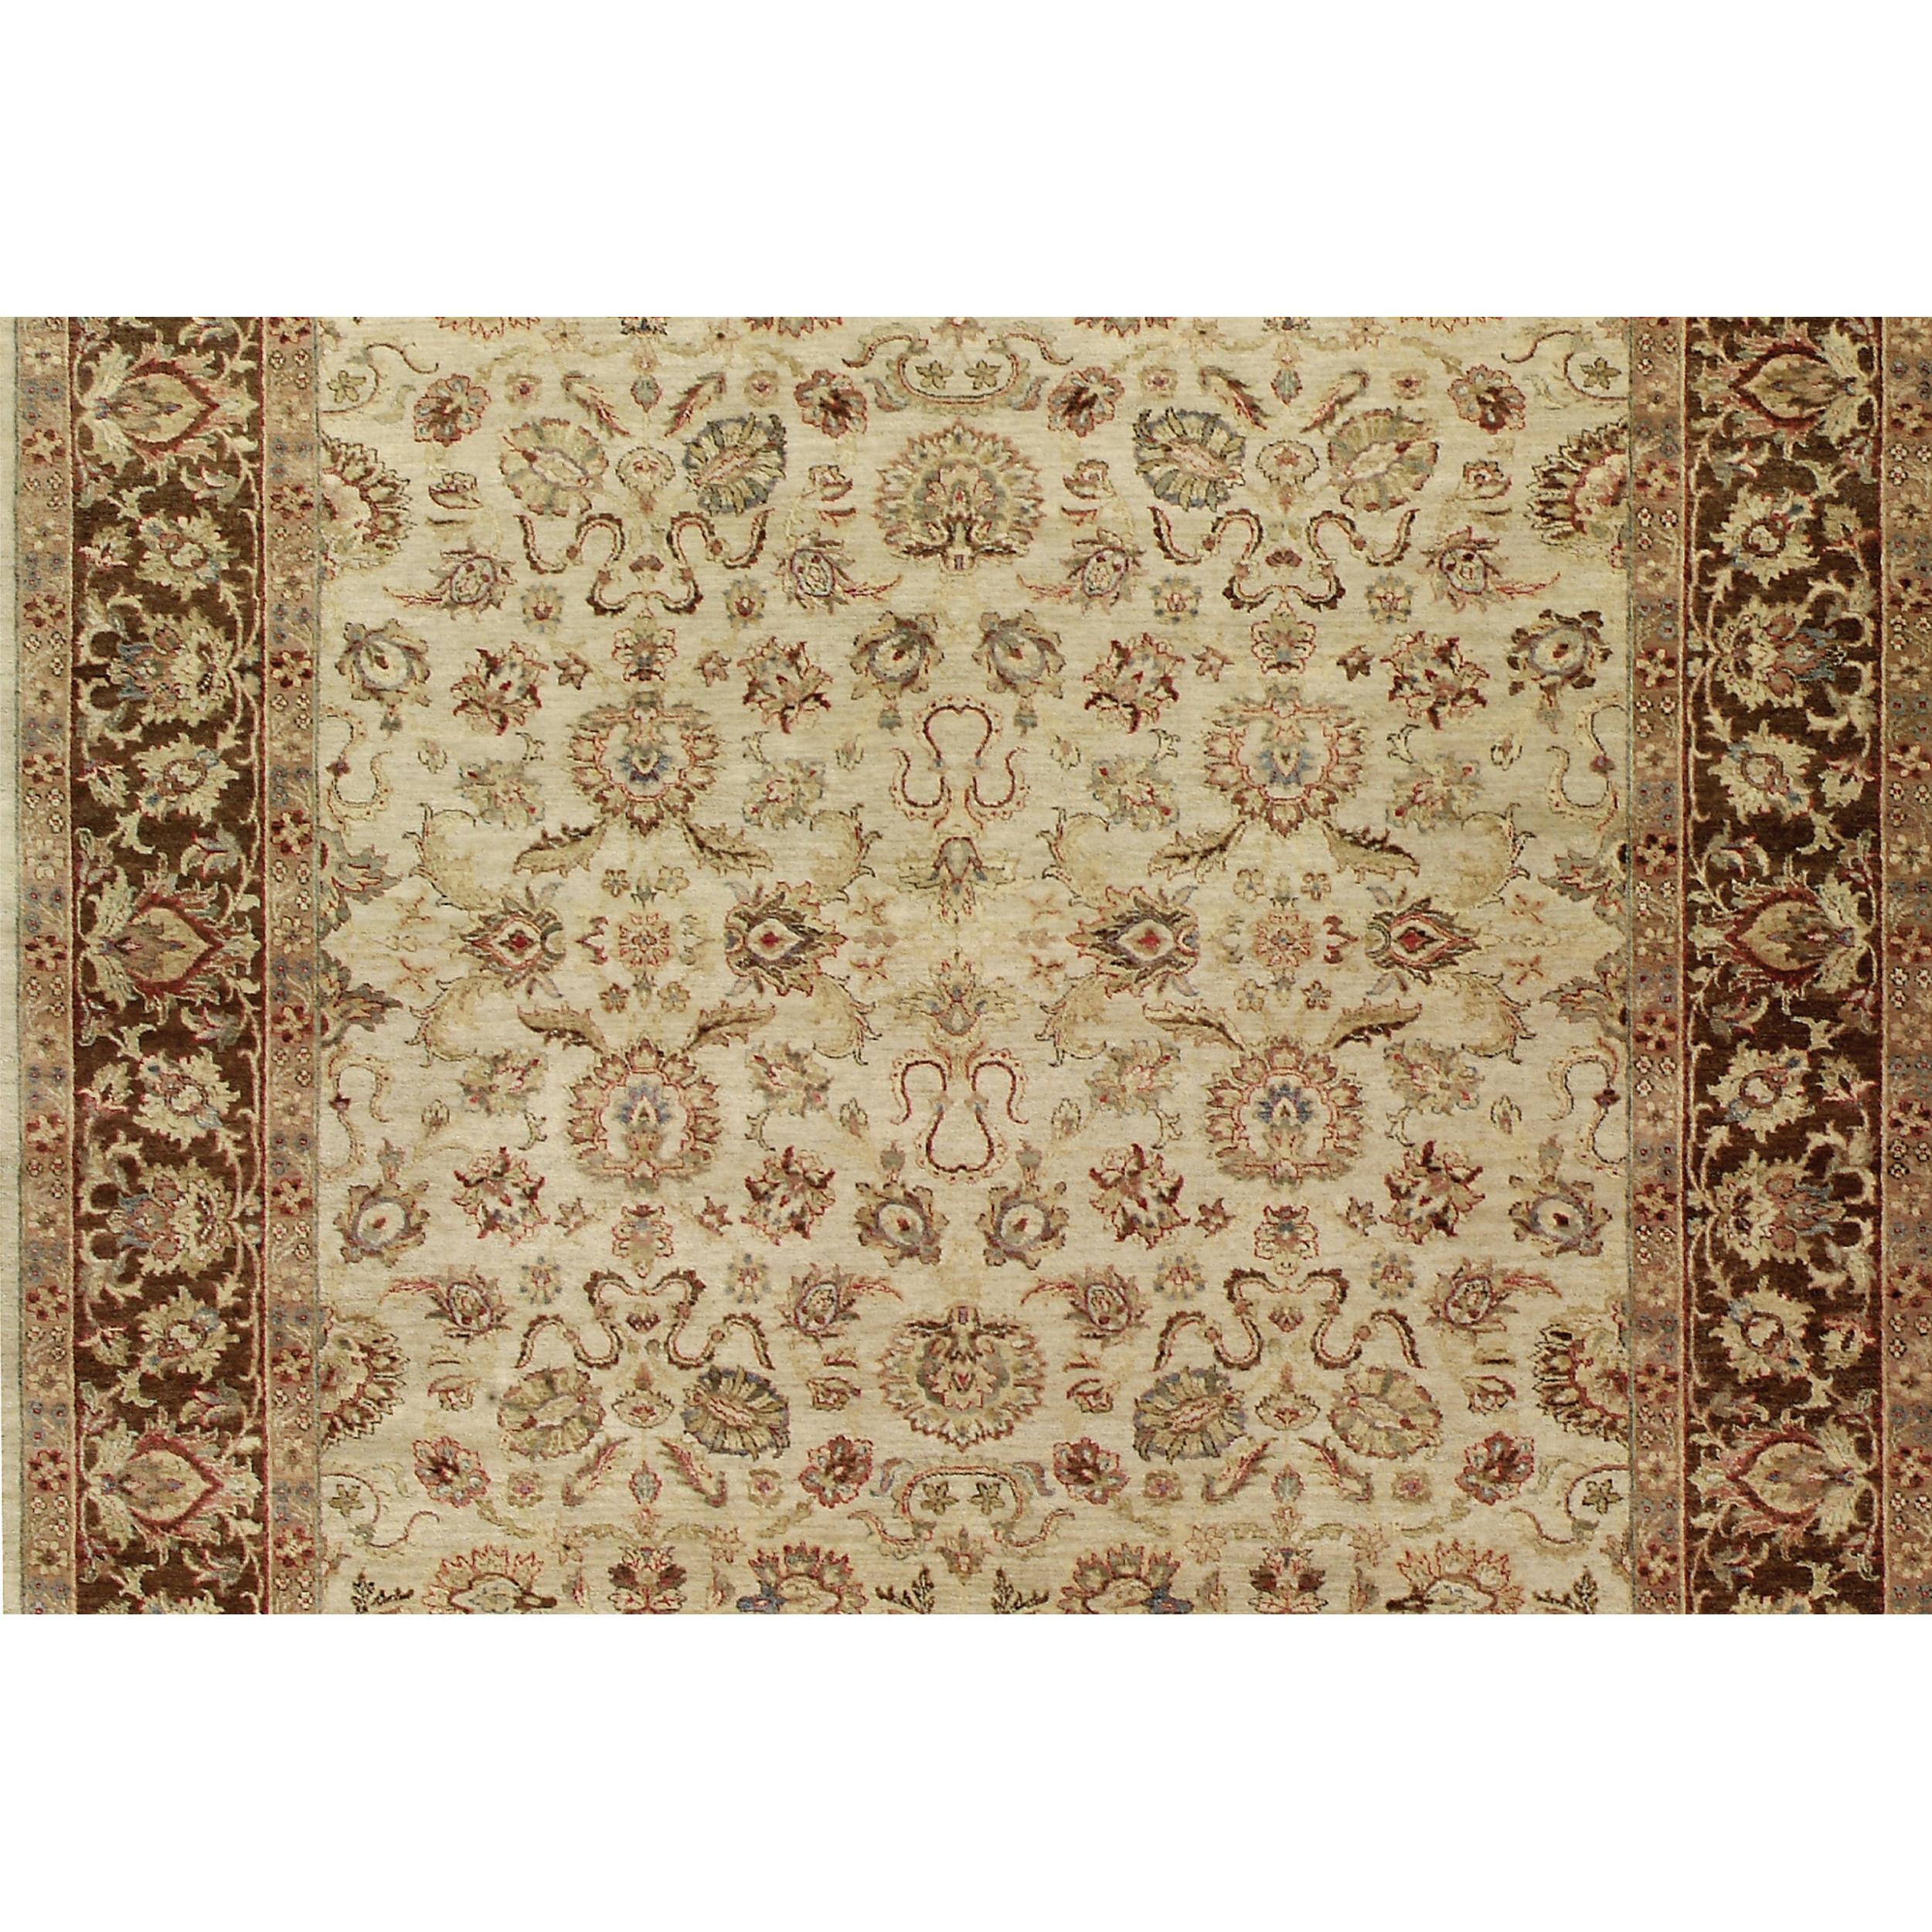 Indian Luxury Traditional Hand-Knotted Cream/Mocha 14x26 Rug For Sale